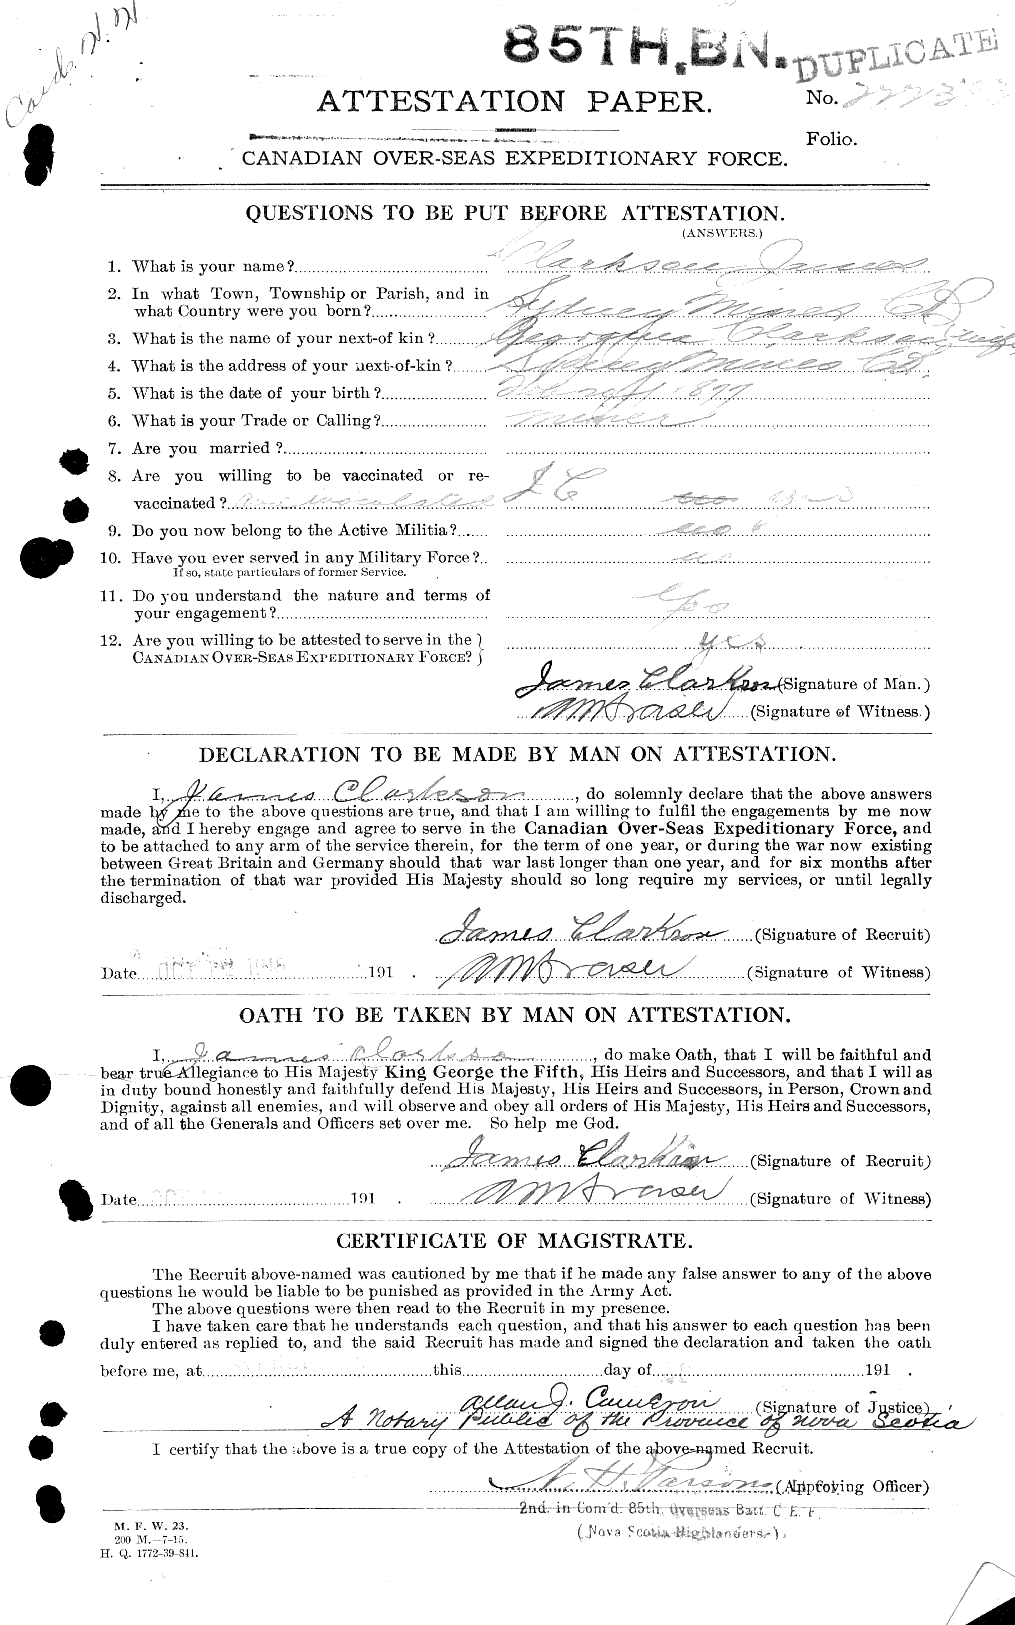 Personnel Records of the First World War - CEF 021443a